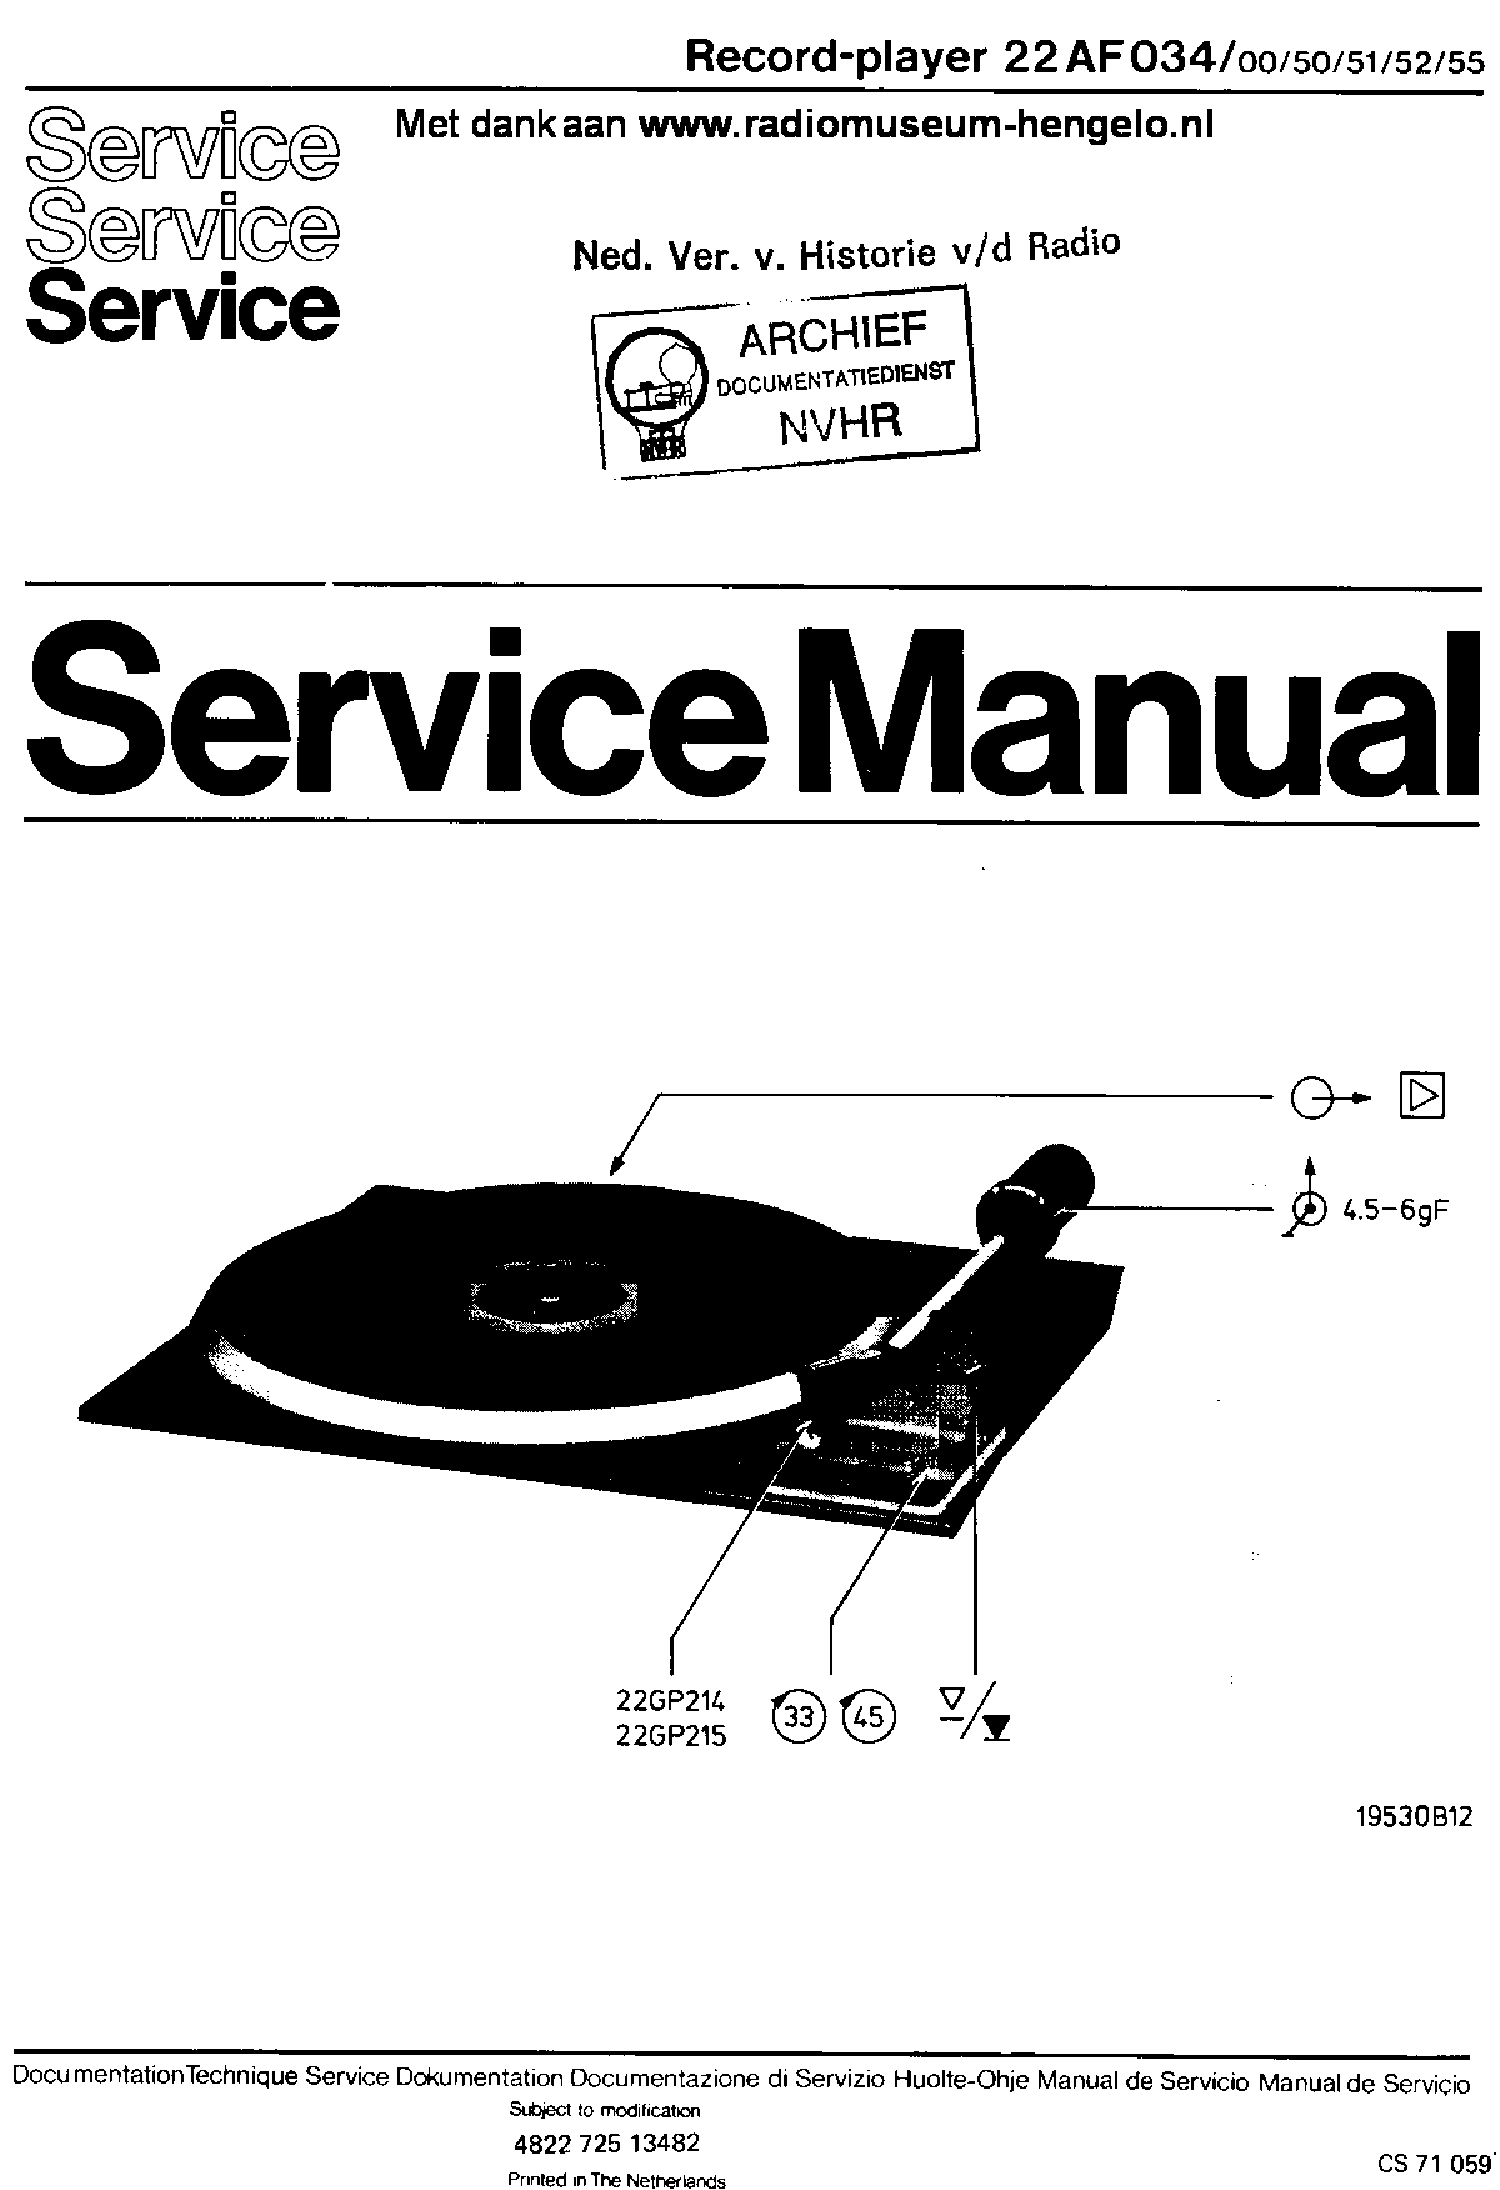 PHILIPS 22AF034-00-50-51-52-55 RECORD PLAYER SM service manual (1st page)